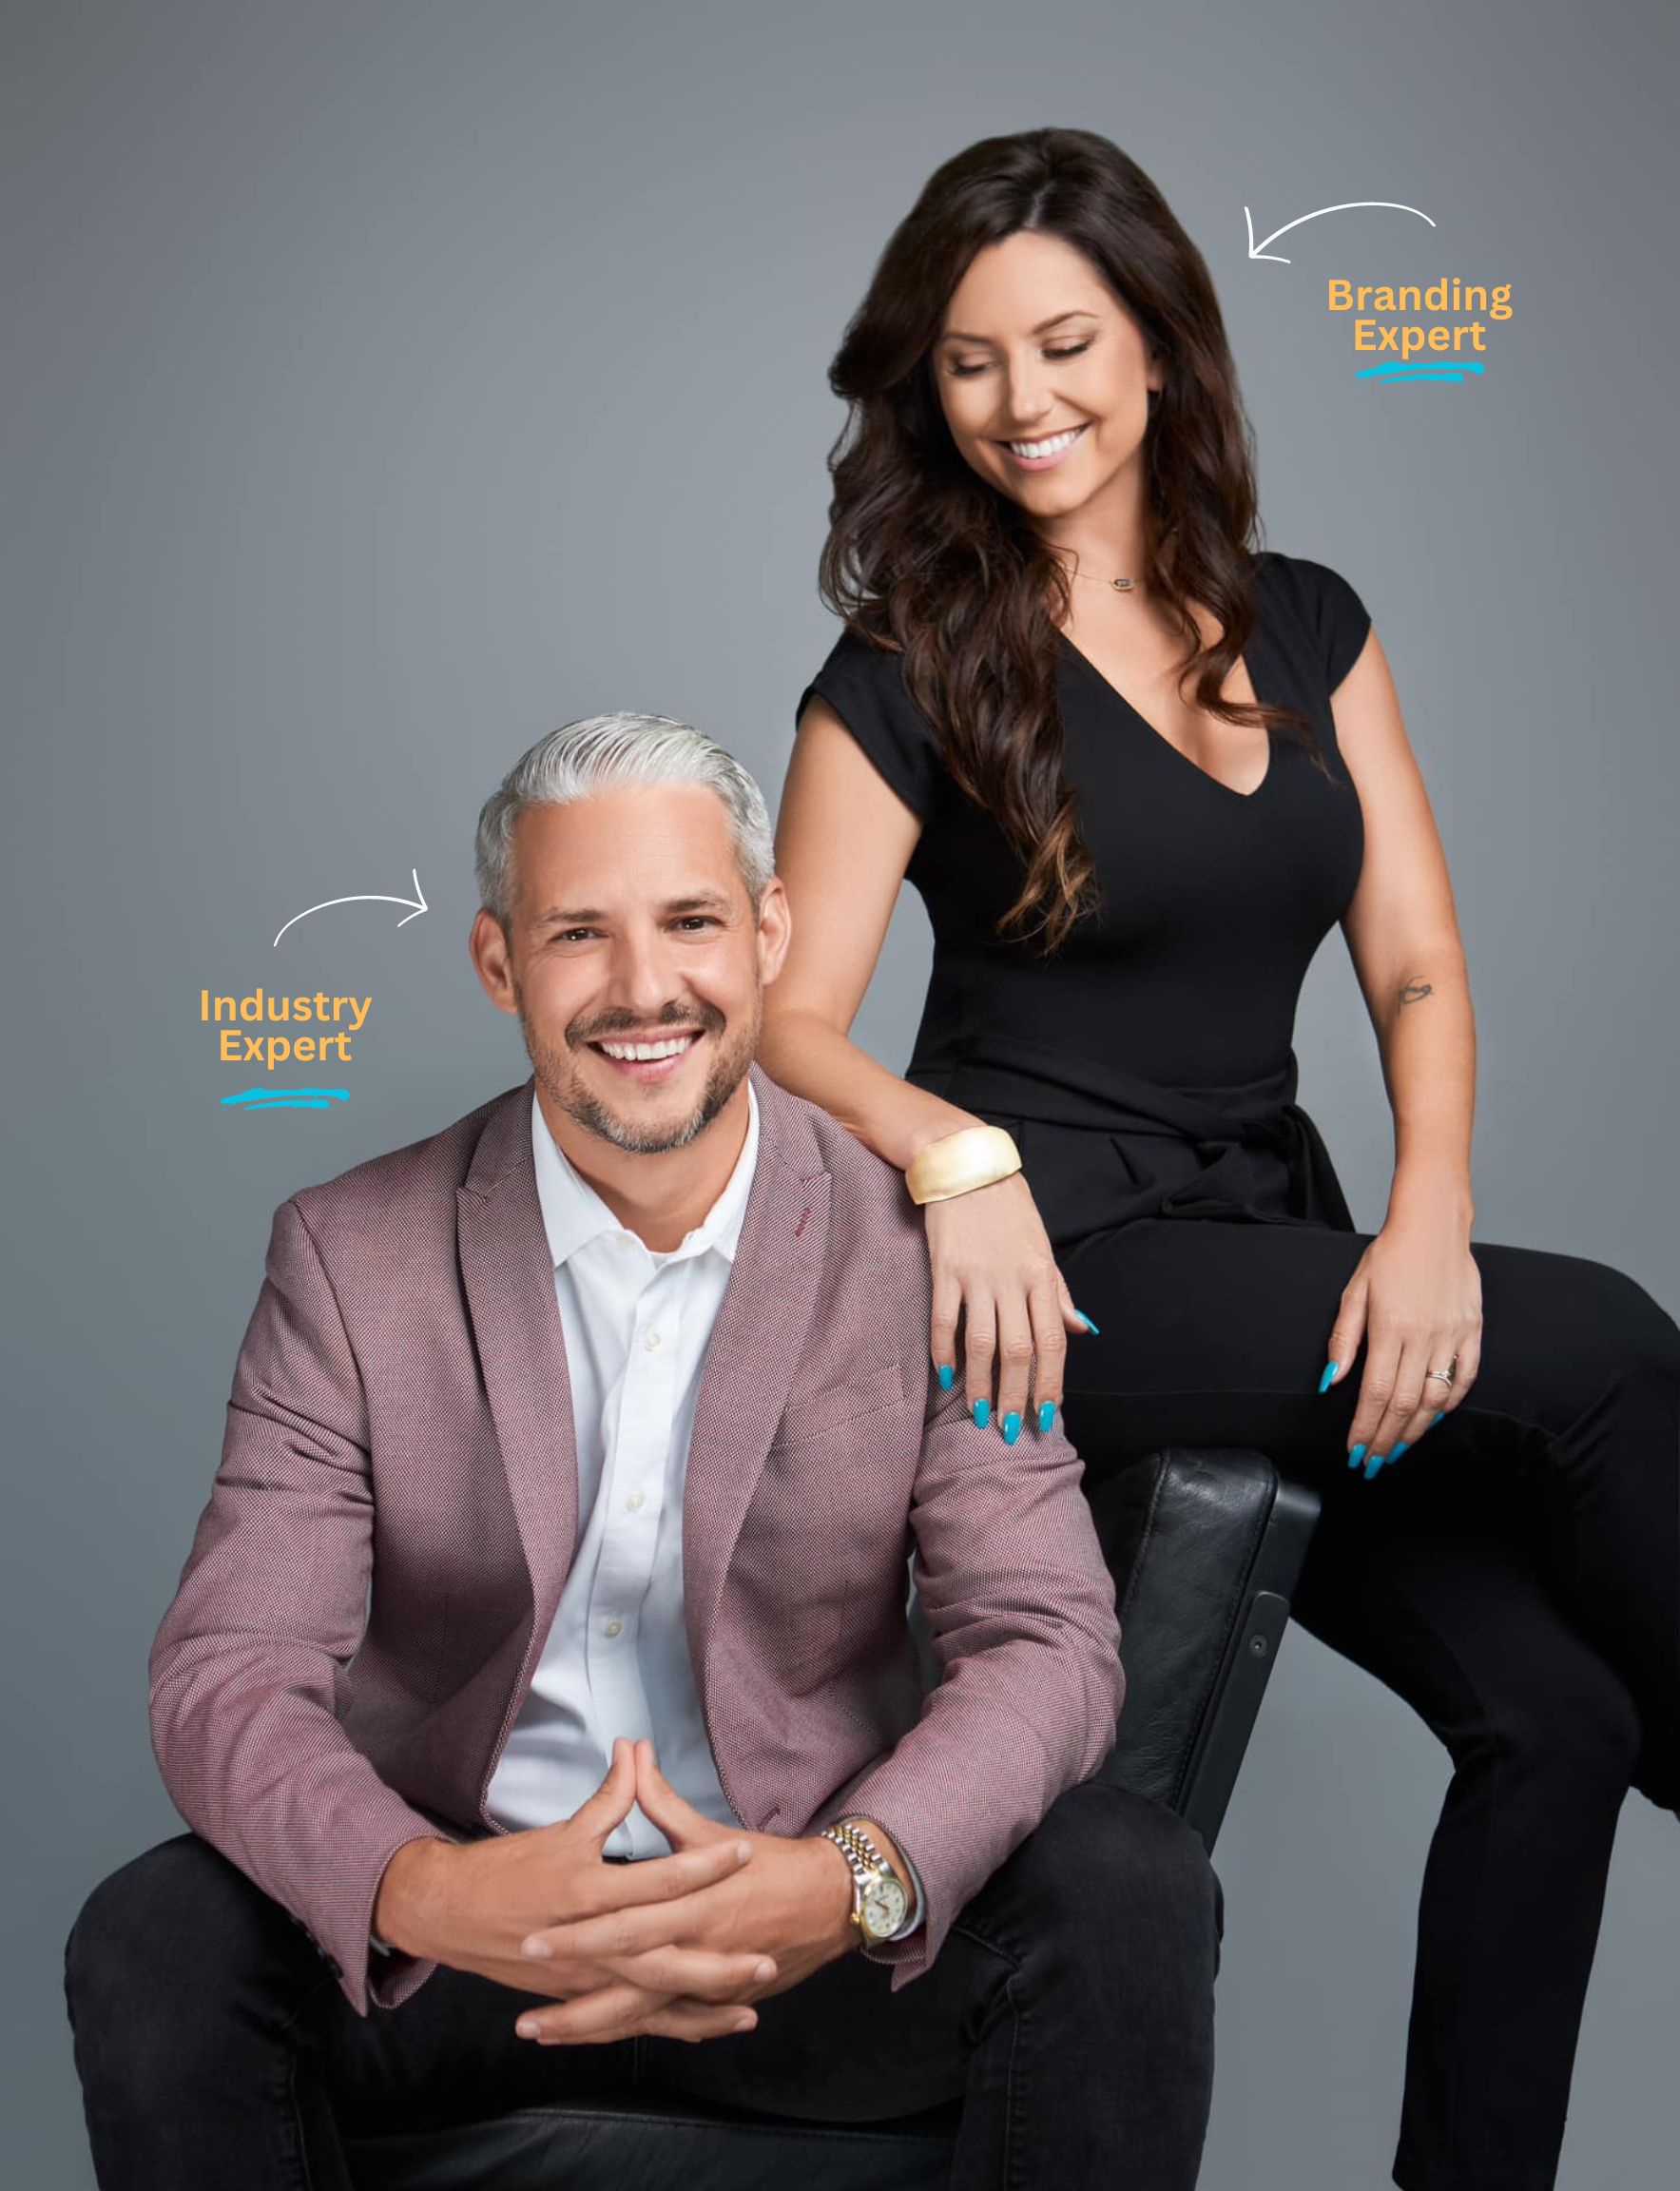 Christopher and Nicole Dickie, Industry, Brand, and growth experts sitting in a studio in front of a gray background.